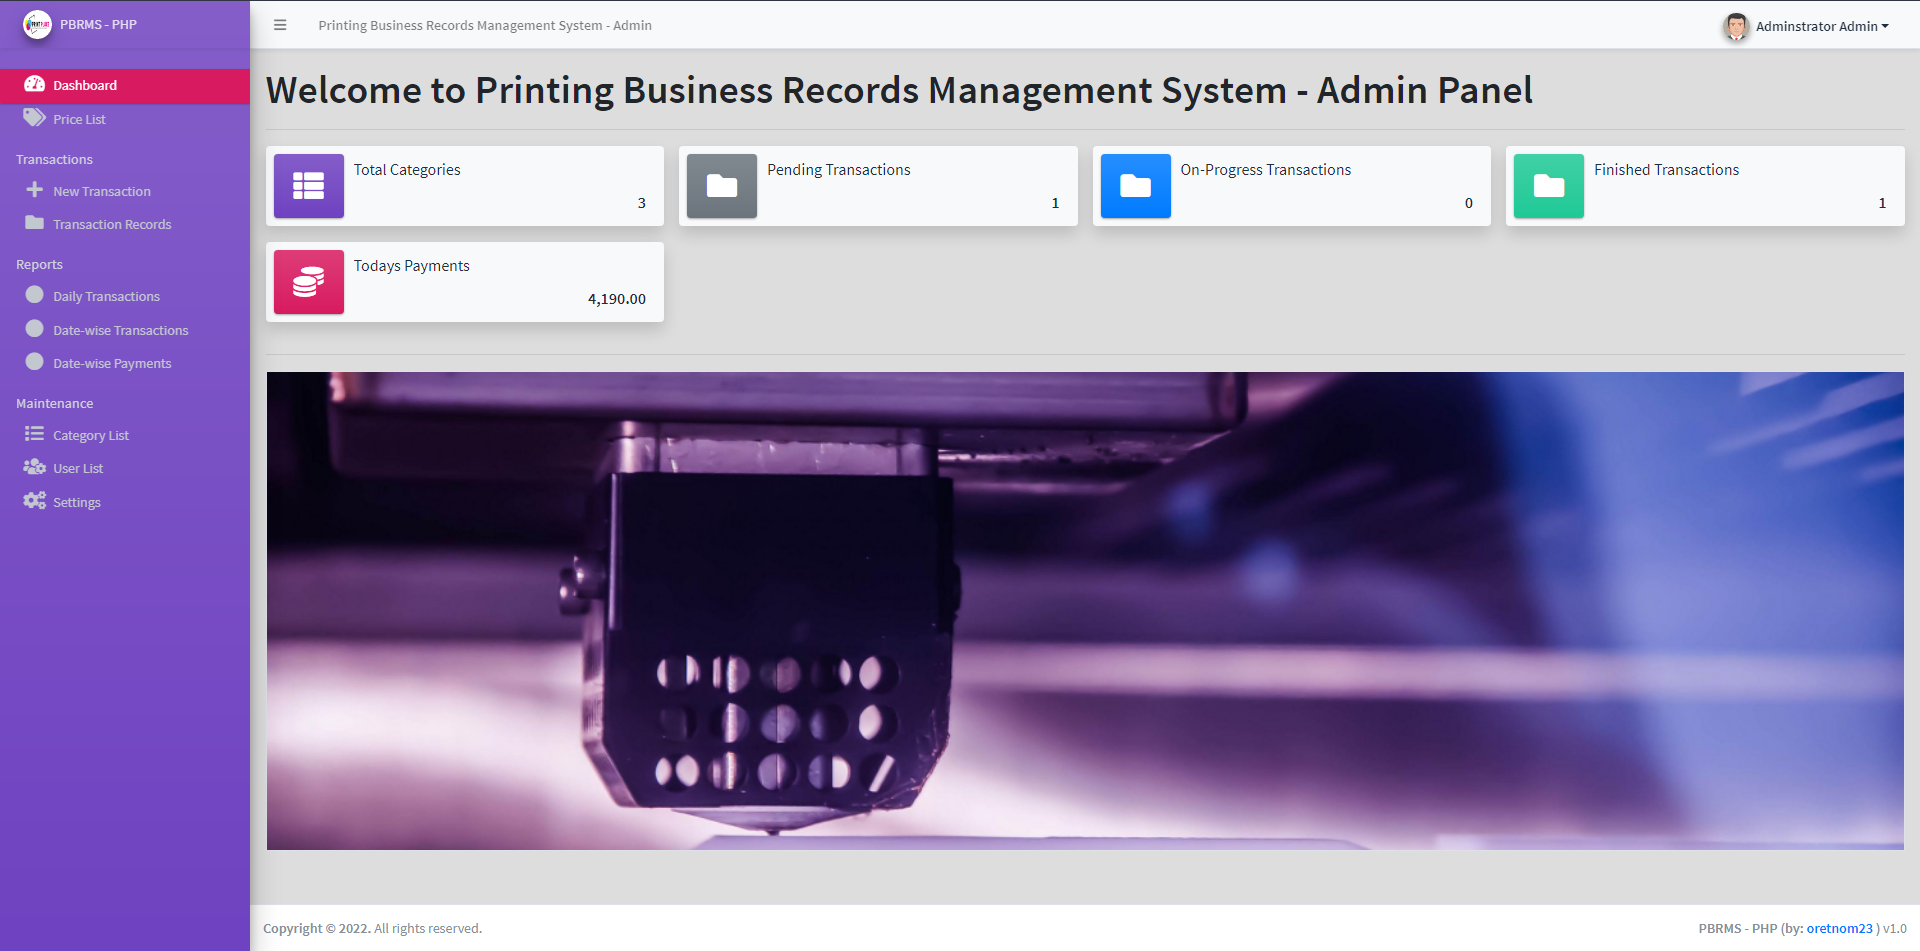 Printing Business Records Management System